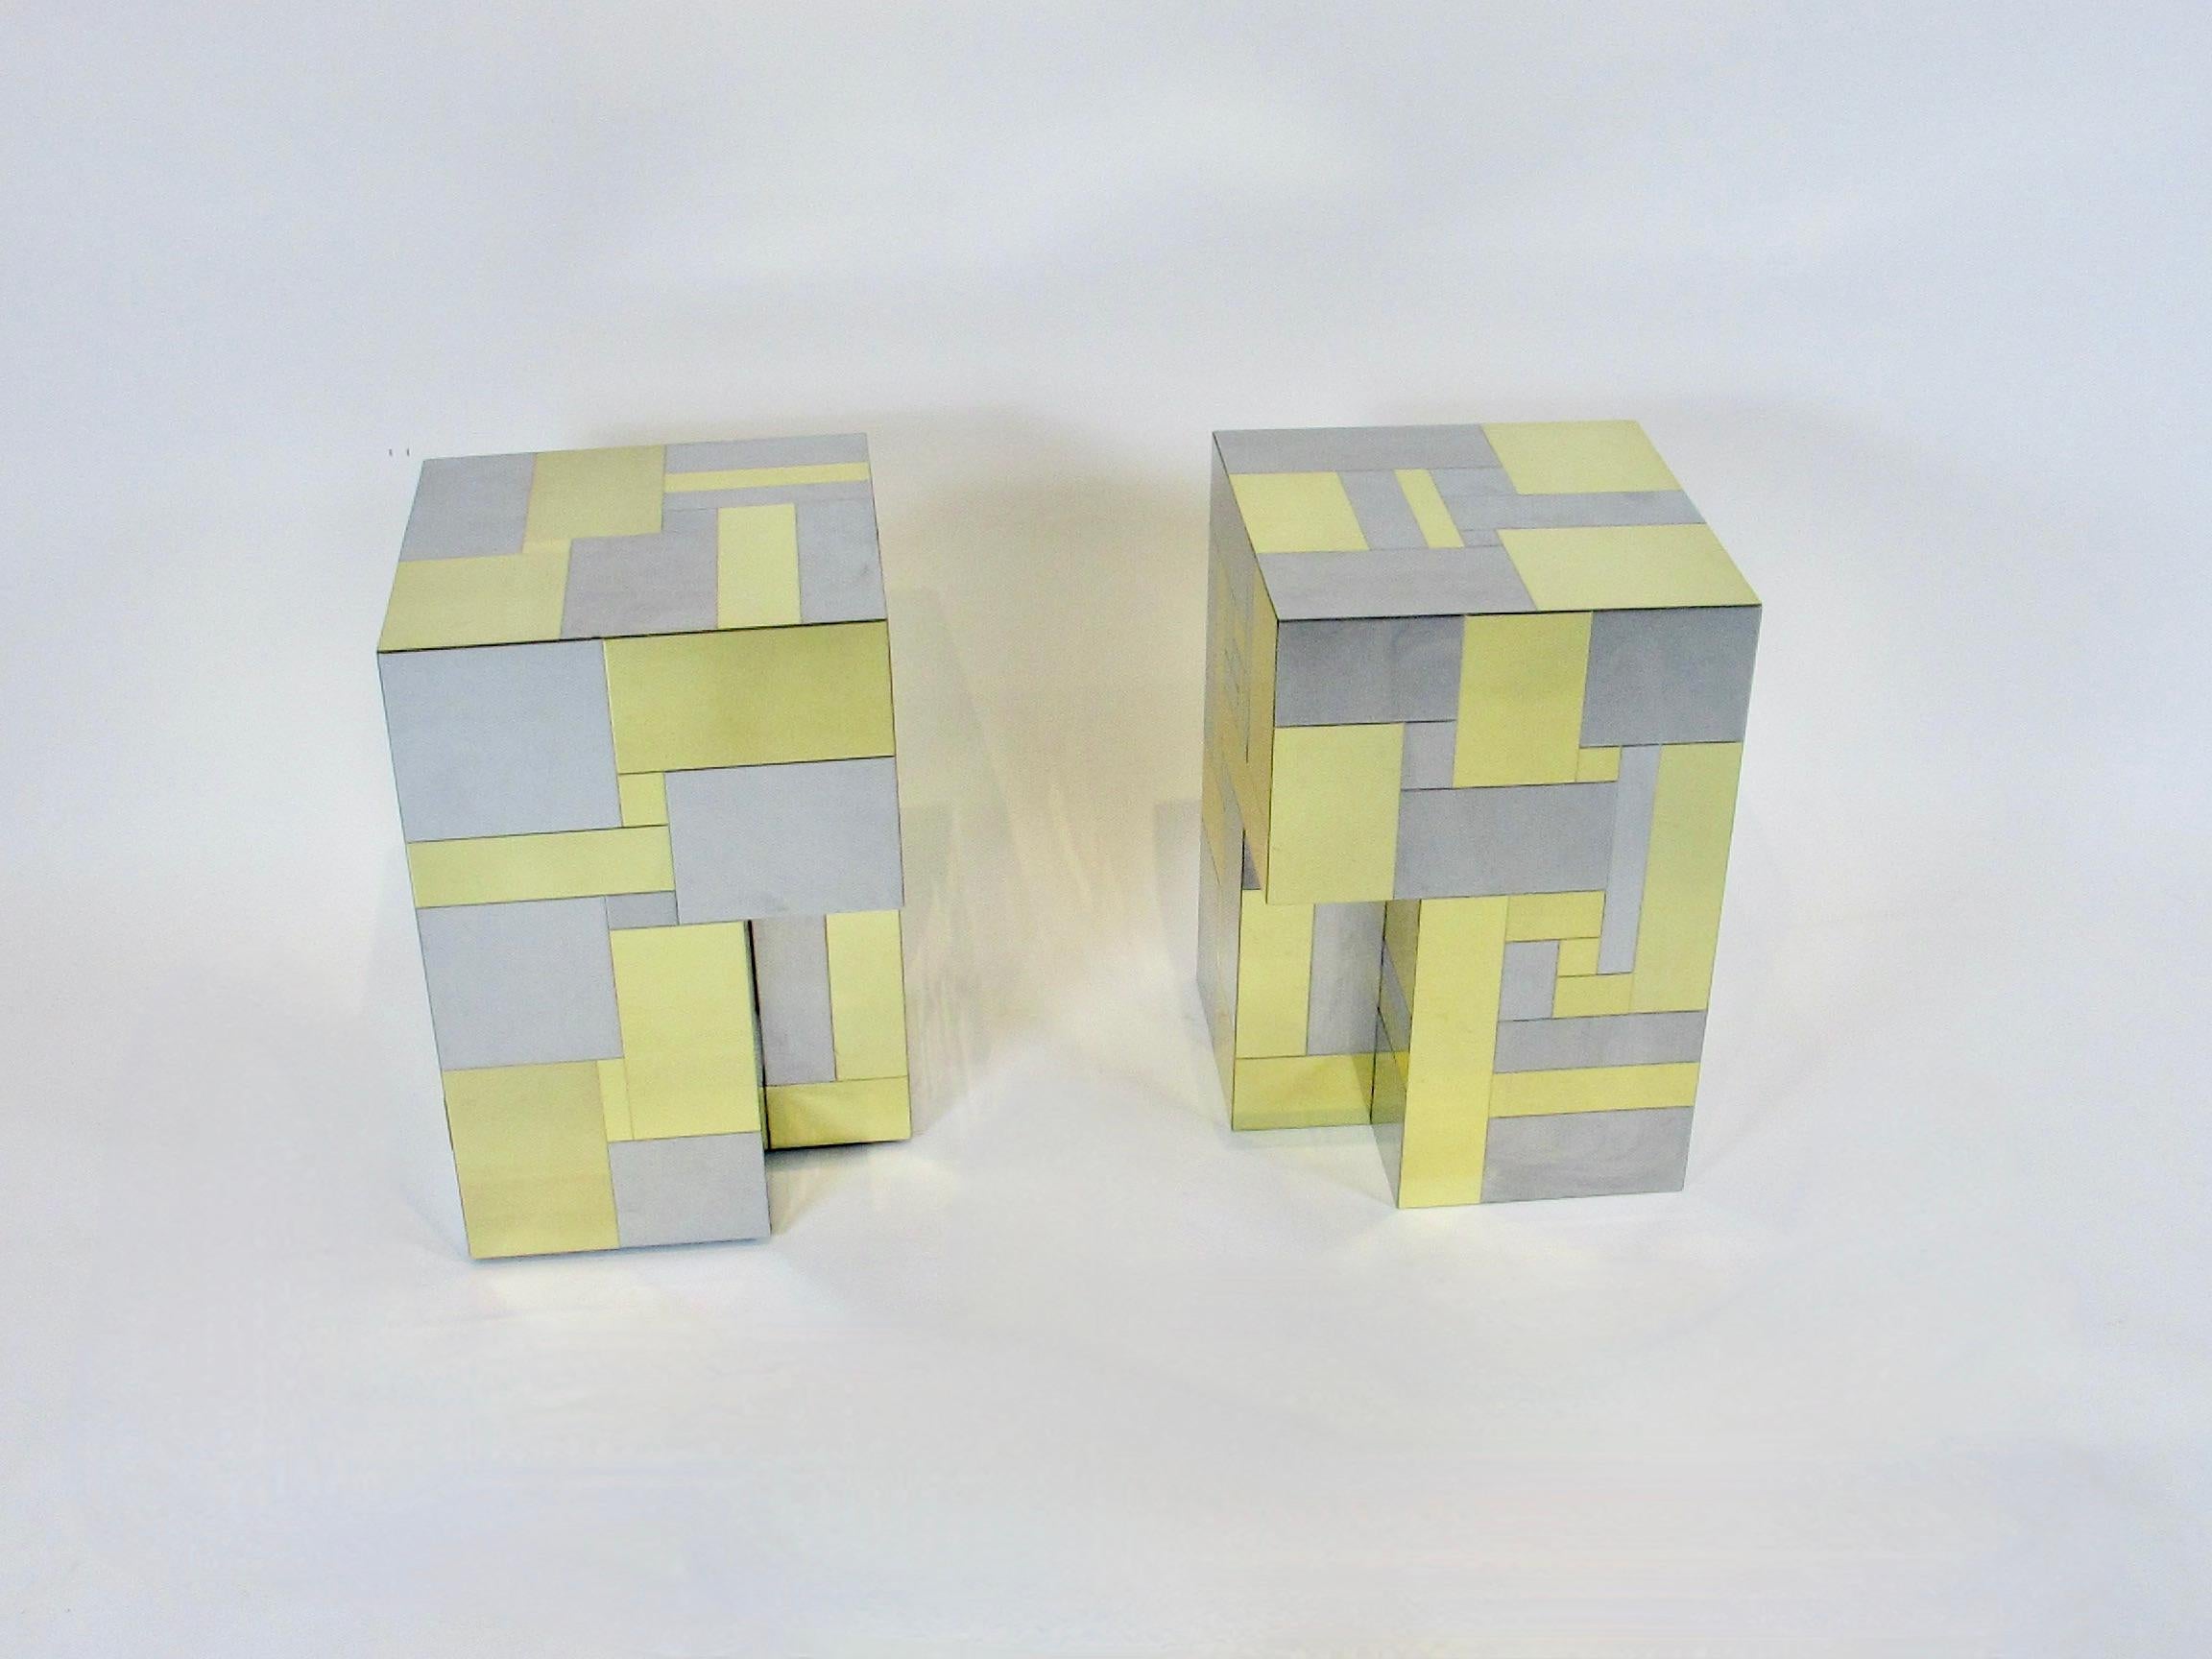 Pair of Paul Evans designed cubes from the city scape series for directional. Each cube is a patchwork of brushed stainless steel and polished brass geometric forms. Each measures 12 x 12 x 18 tall. The pair can be used as side or end tables or with